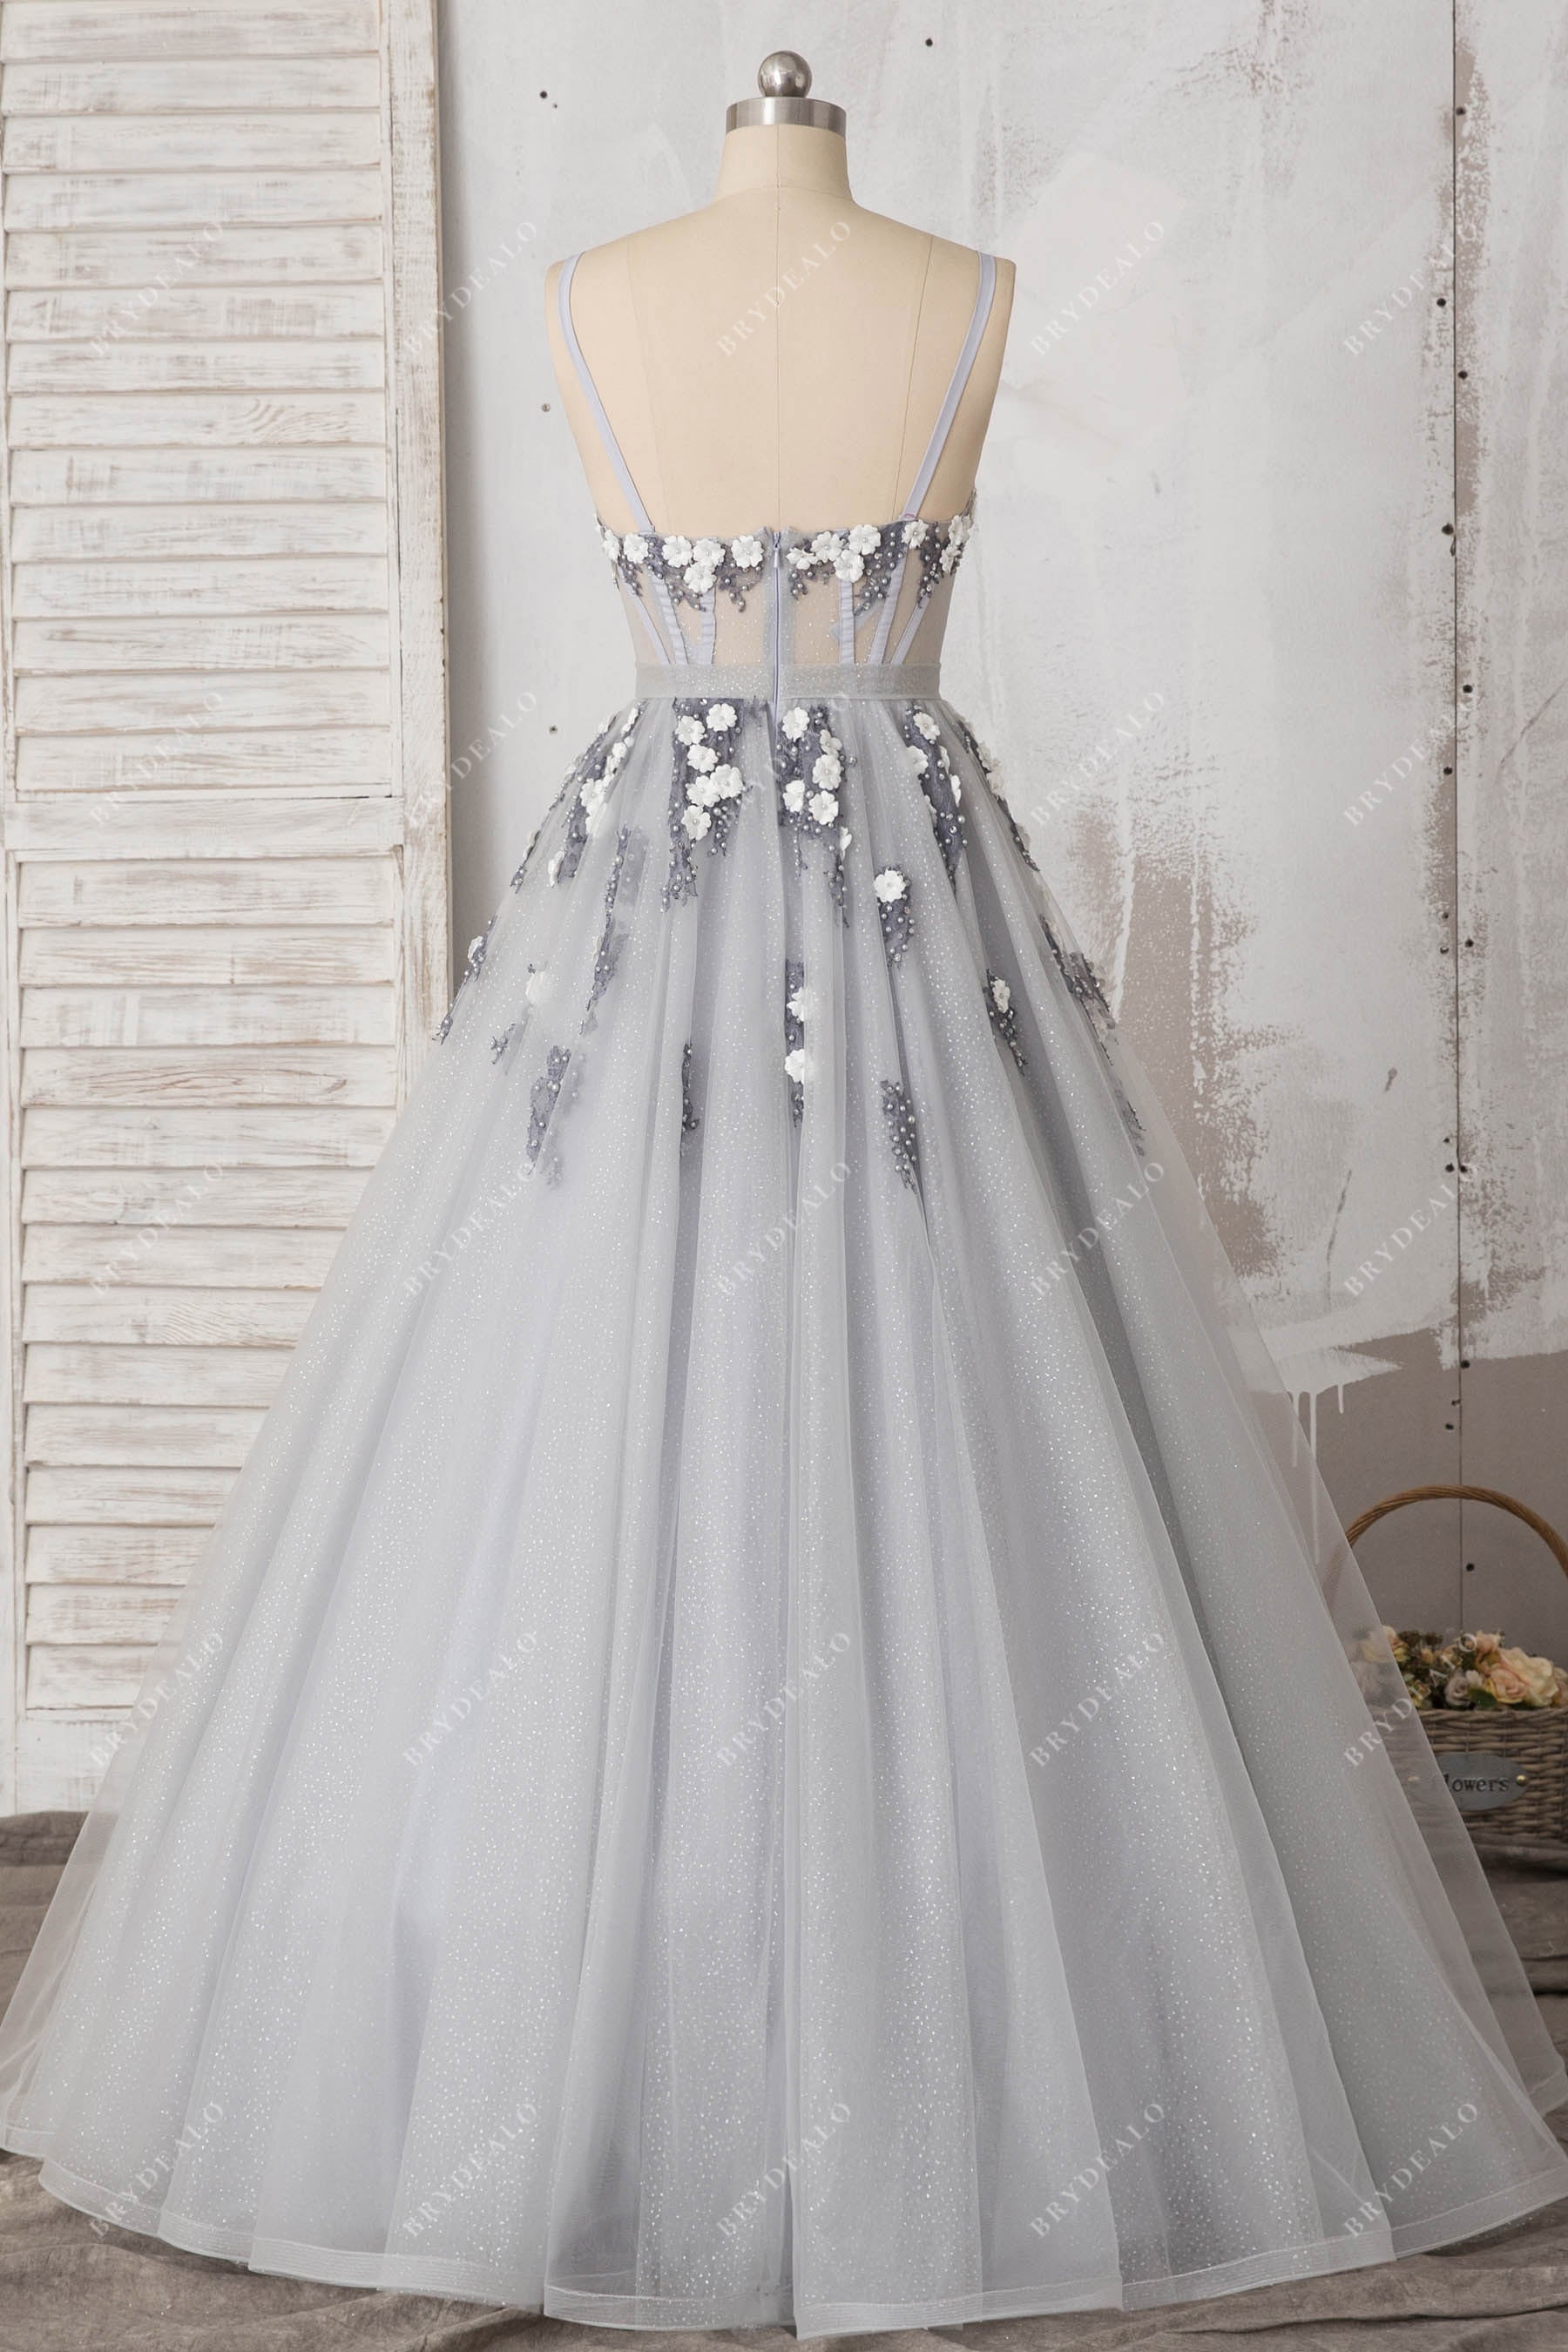 Pearls Flower Silver Corset Prom Dress